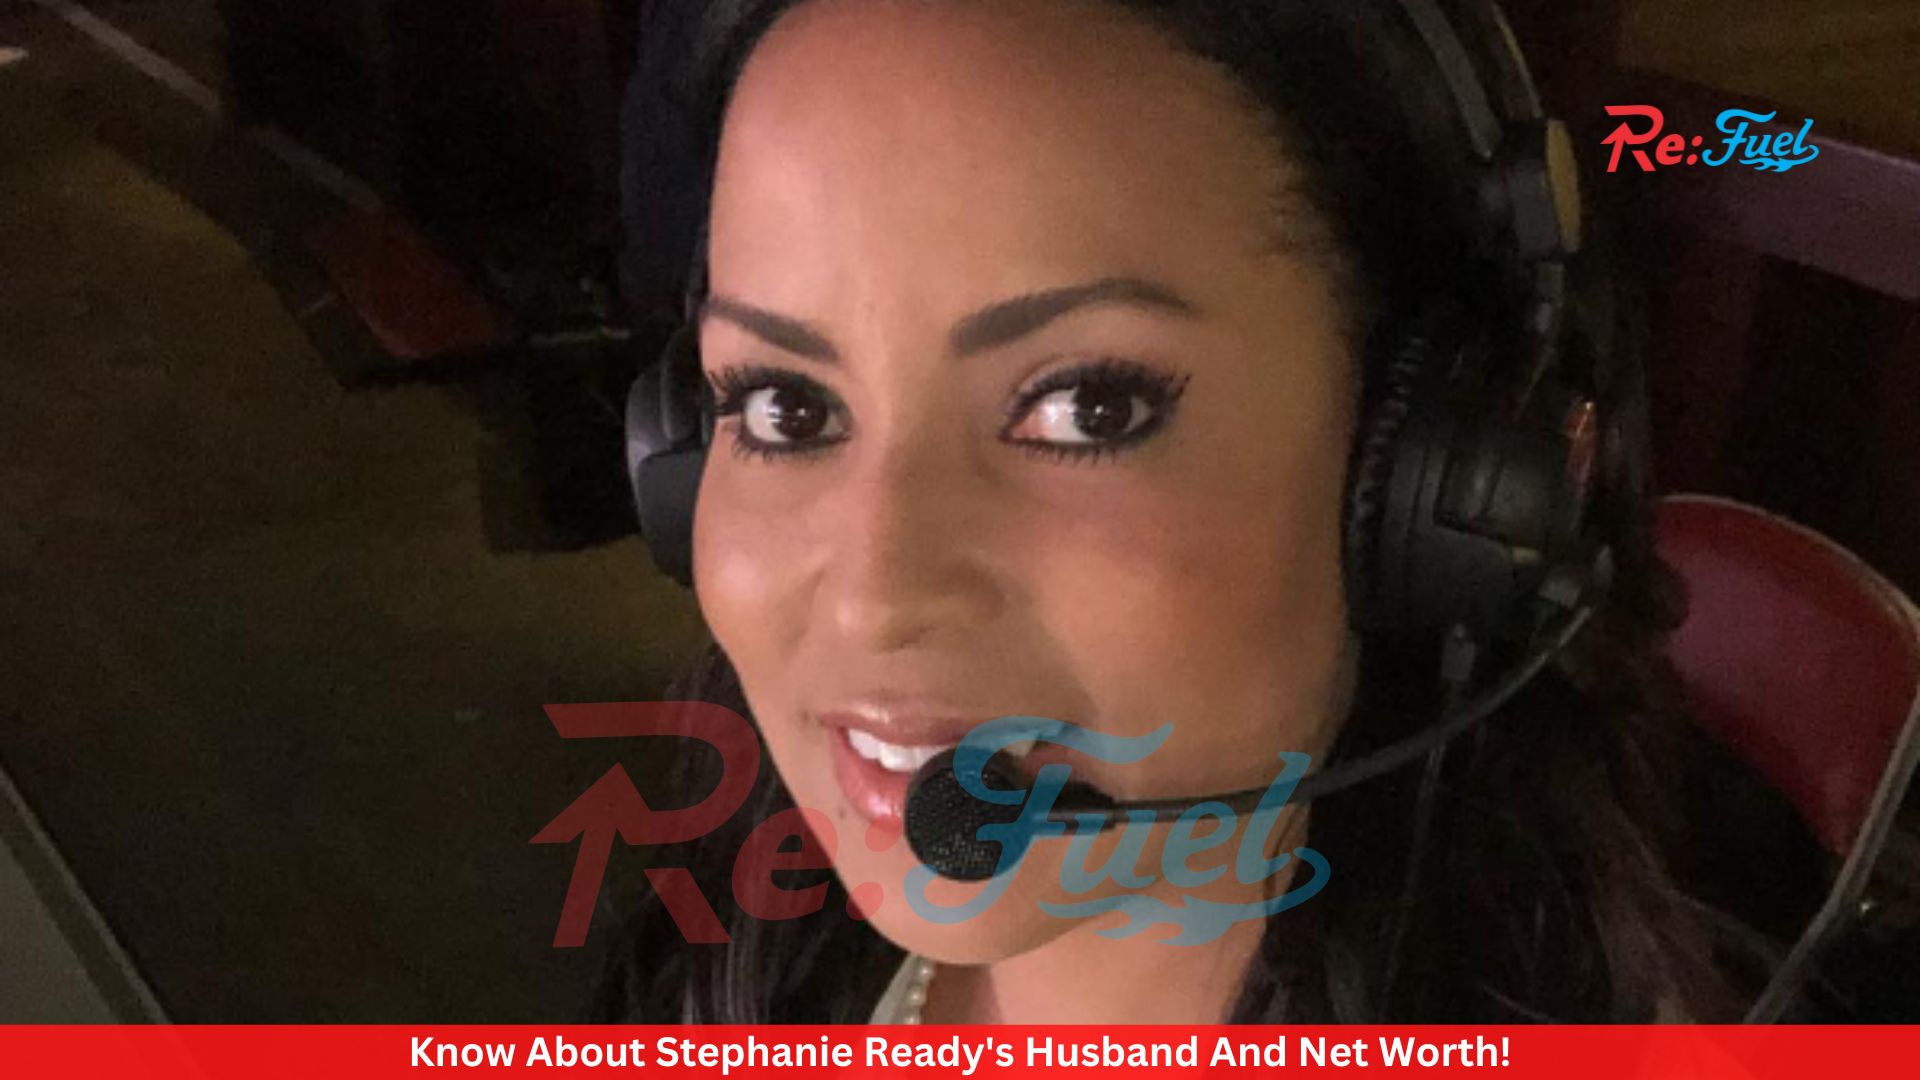 Know About Stephanie Ready's Husband And Net Worth!